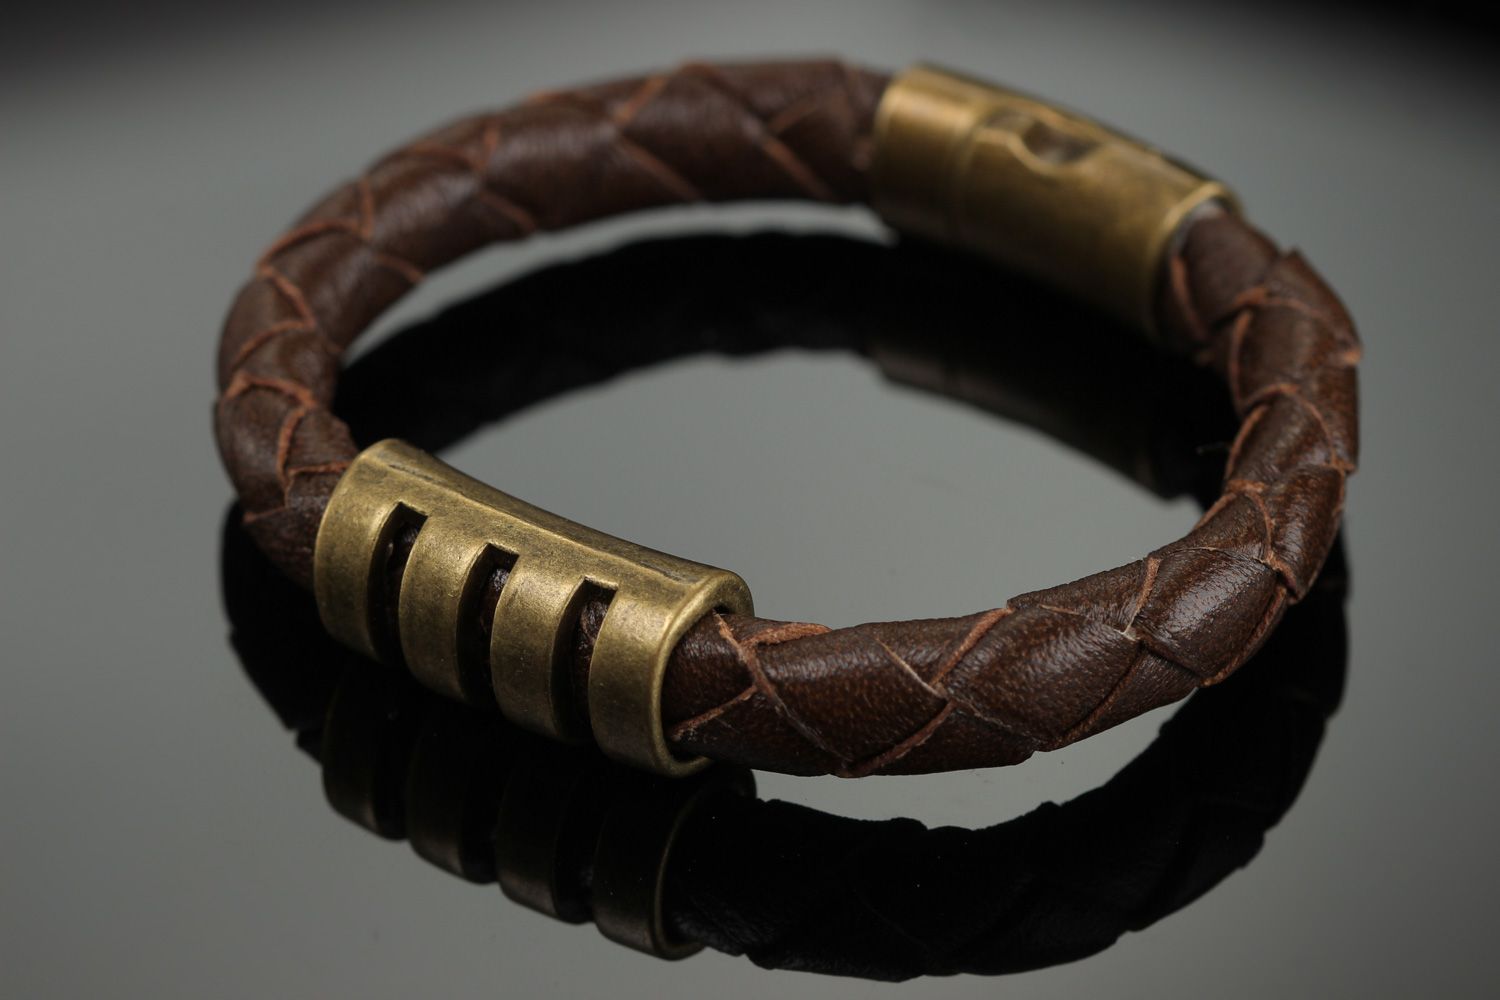 Handmade wrist bracelet woven of brown genuine leather with metal inserts photo 1